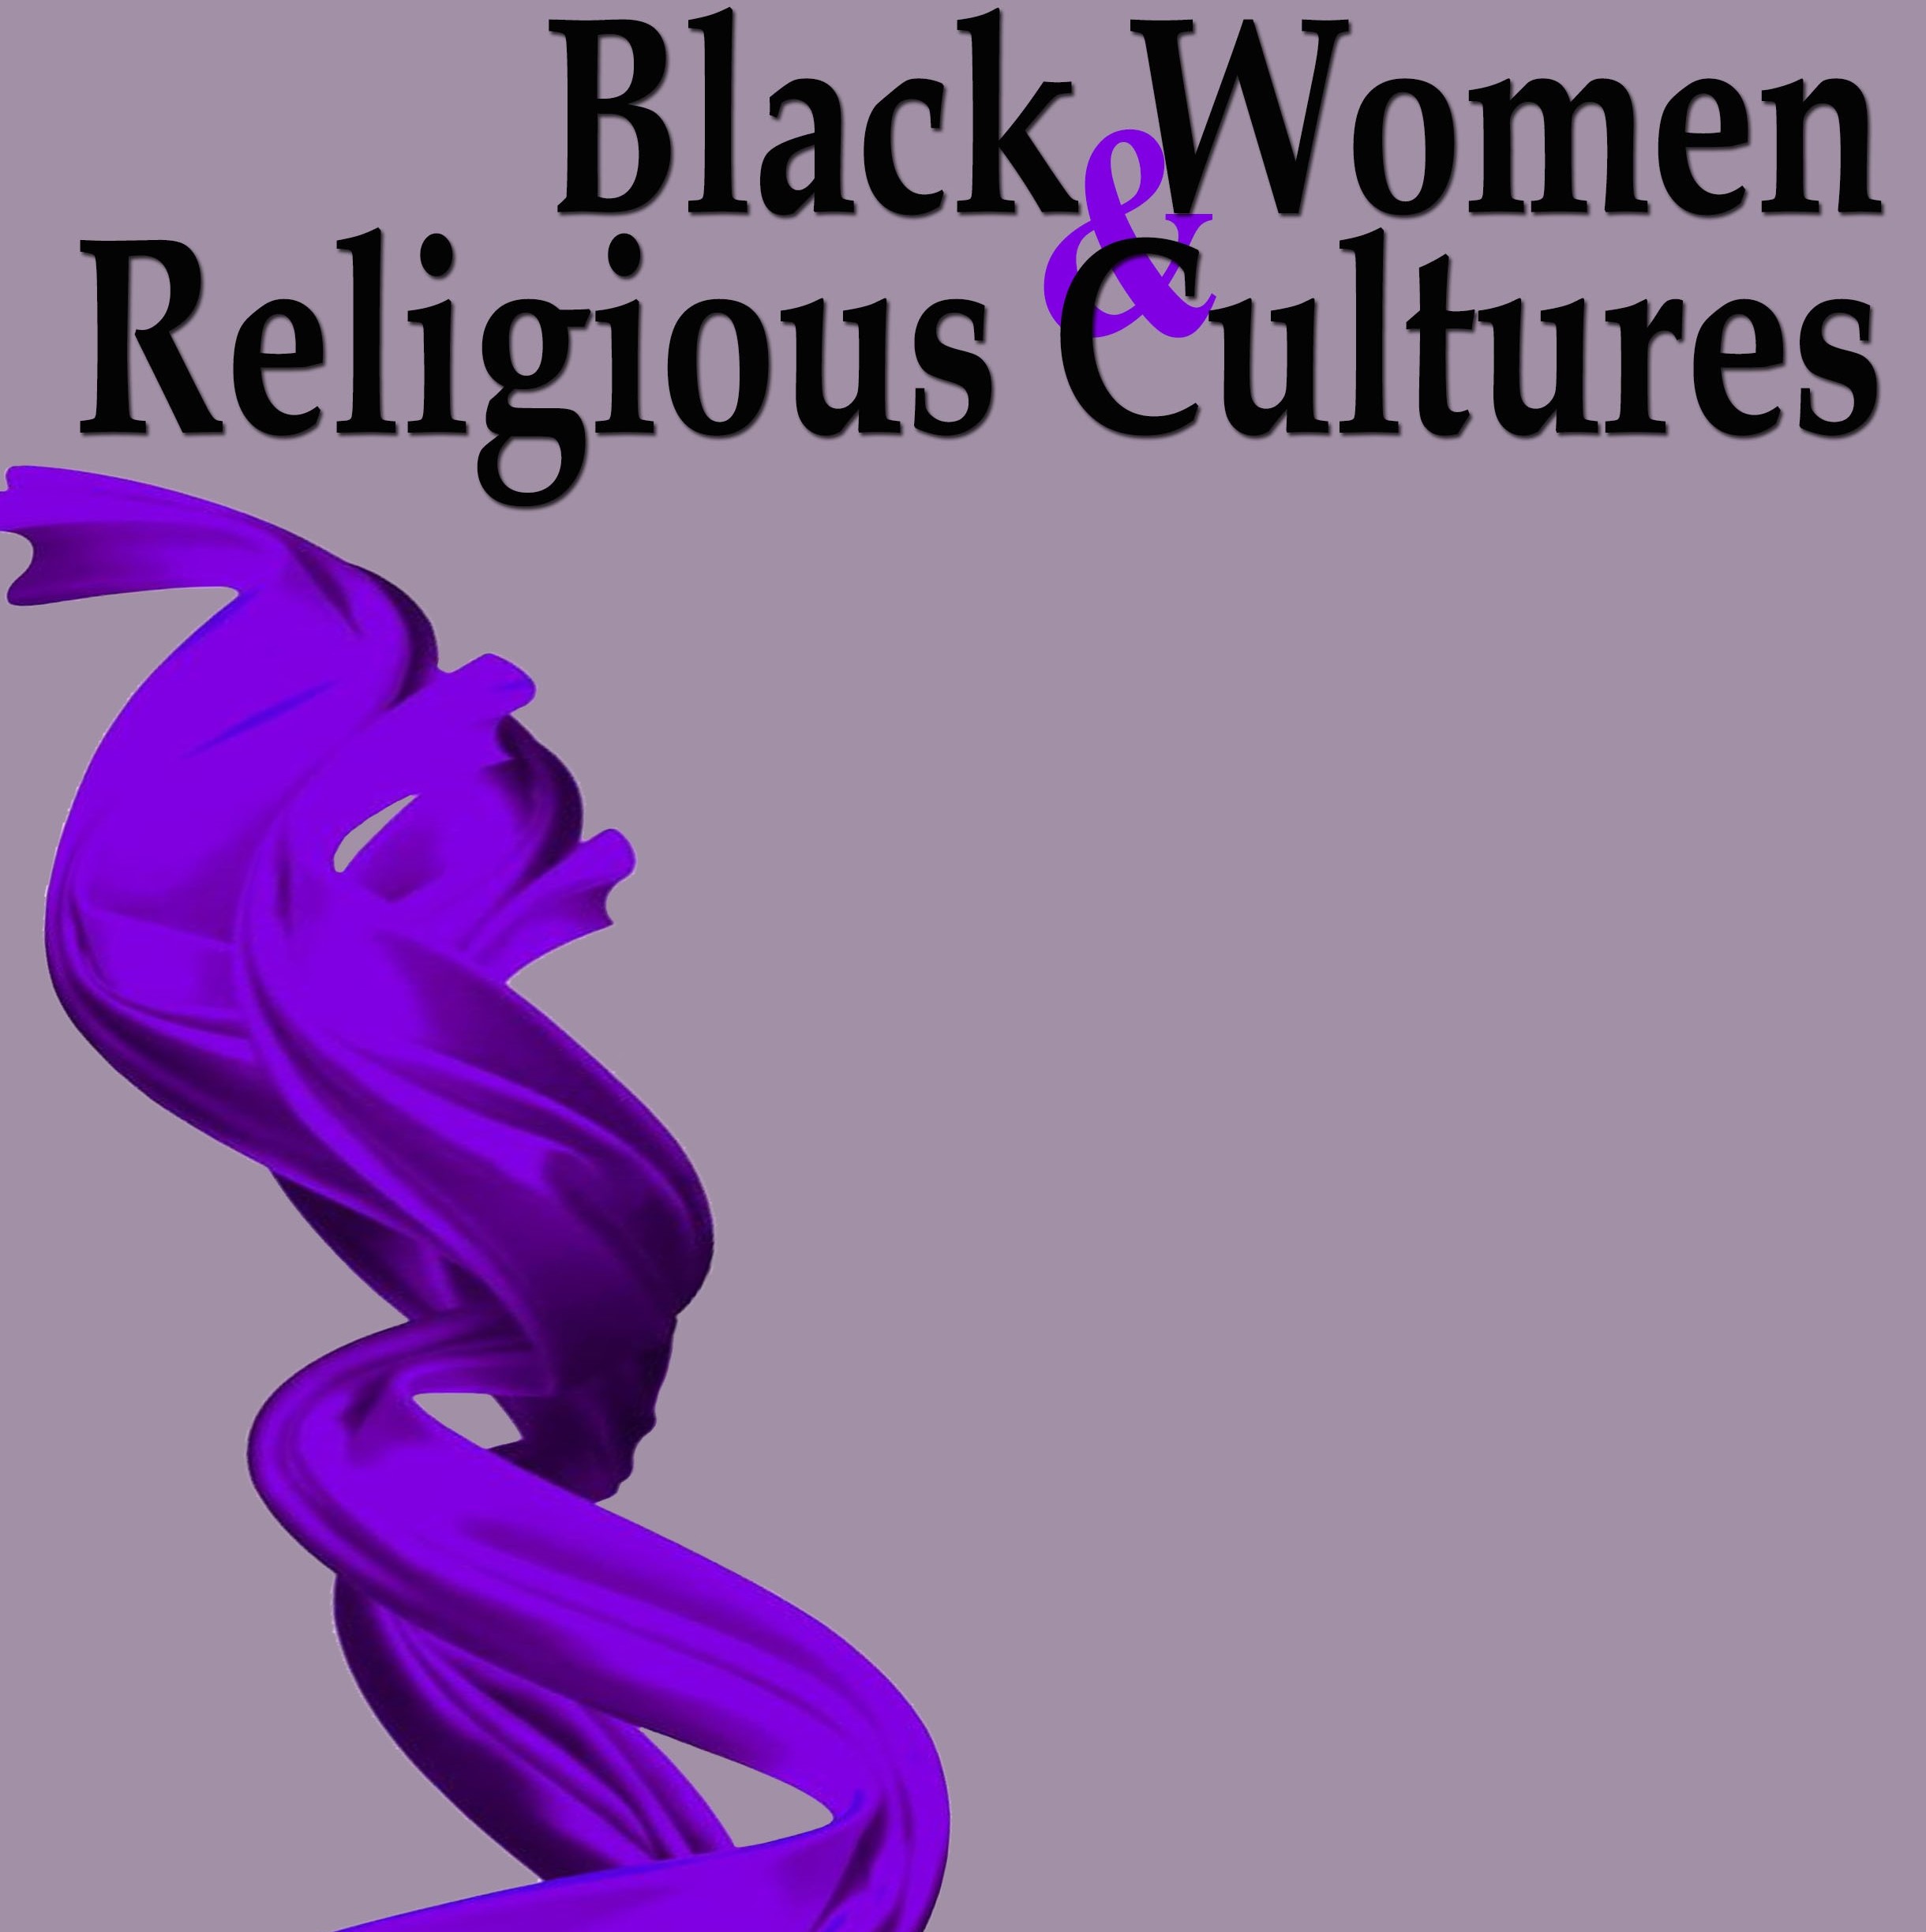 Black Women and Religious Cultures